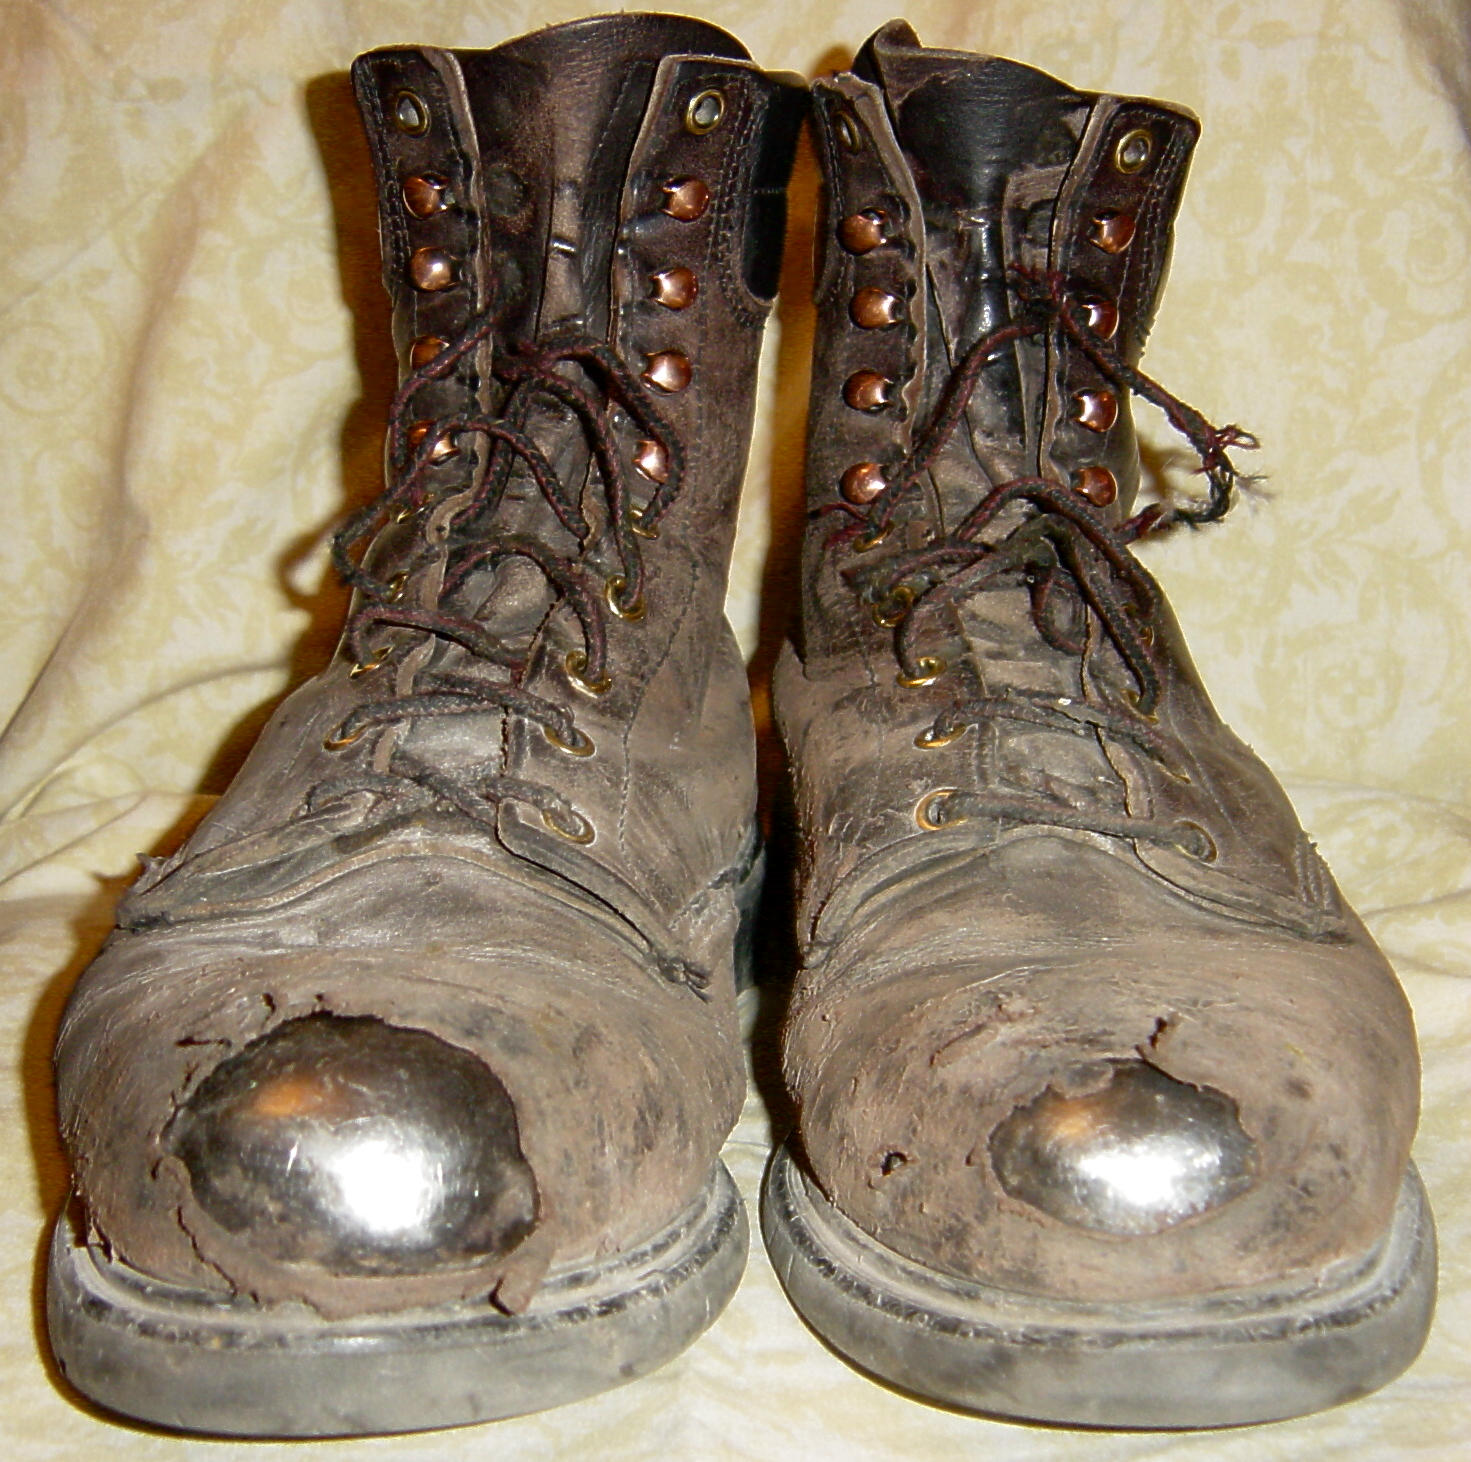 tattered_old_work_boots_by_fantasystock.jpg